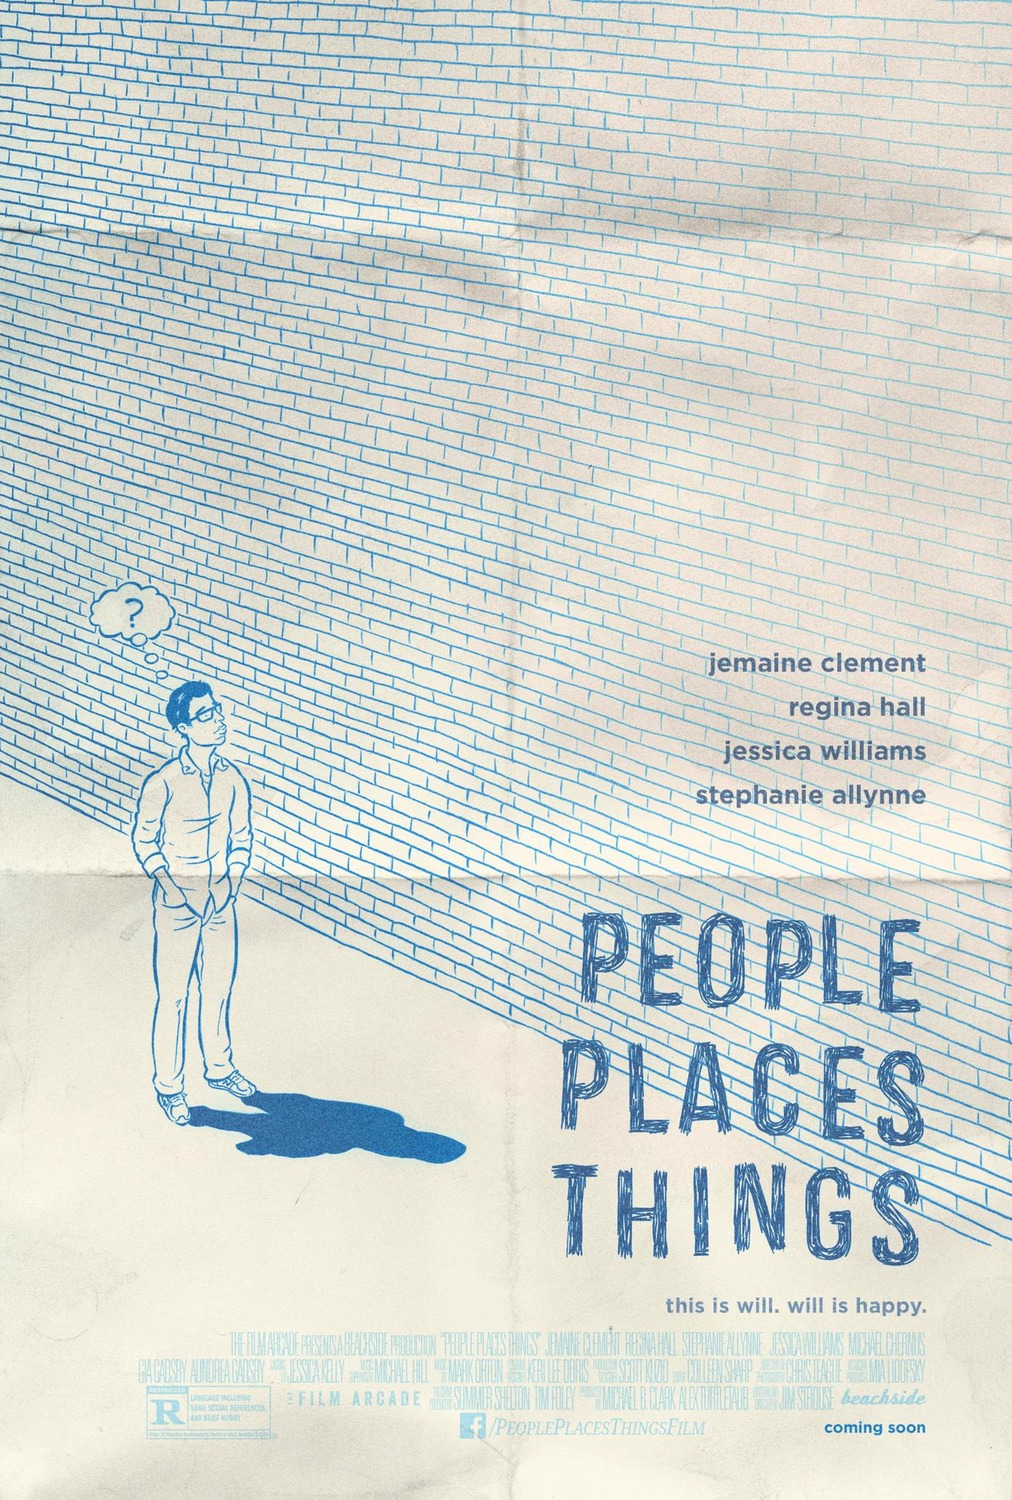 Extra Large Movie Poster Image for People, Places, Things (#4 of 4)